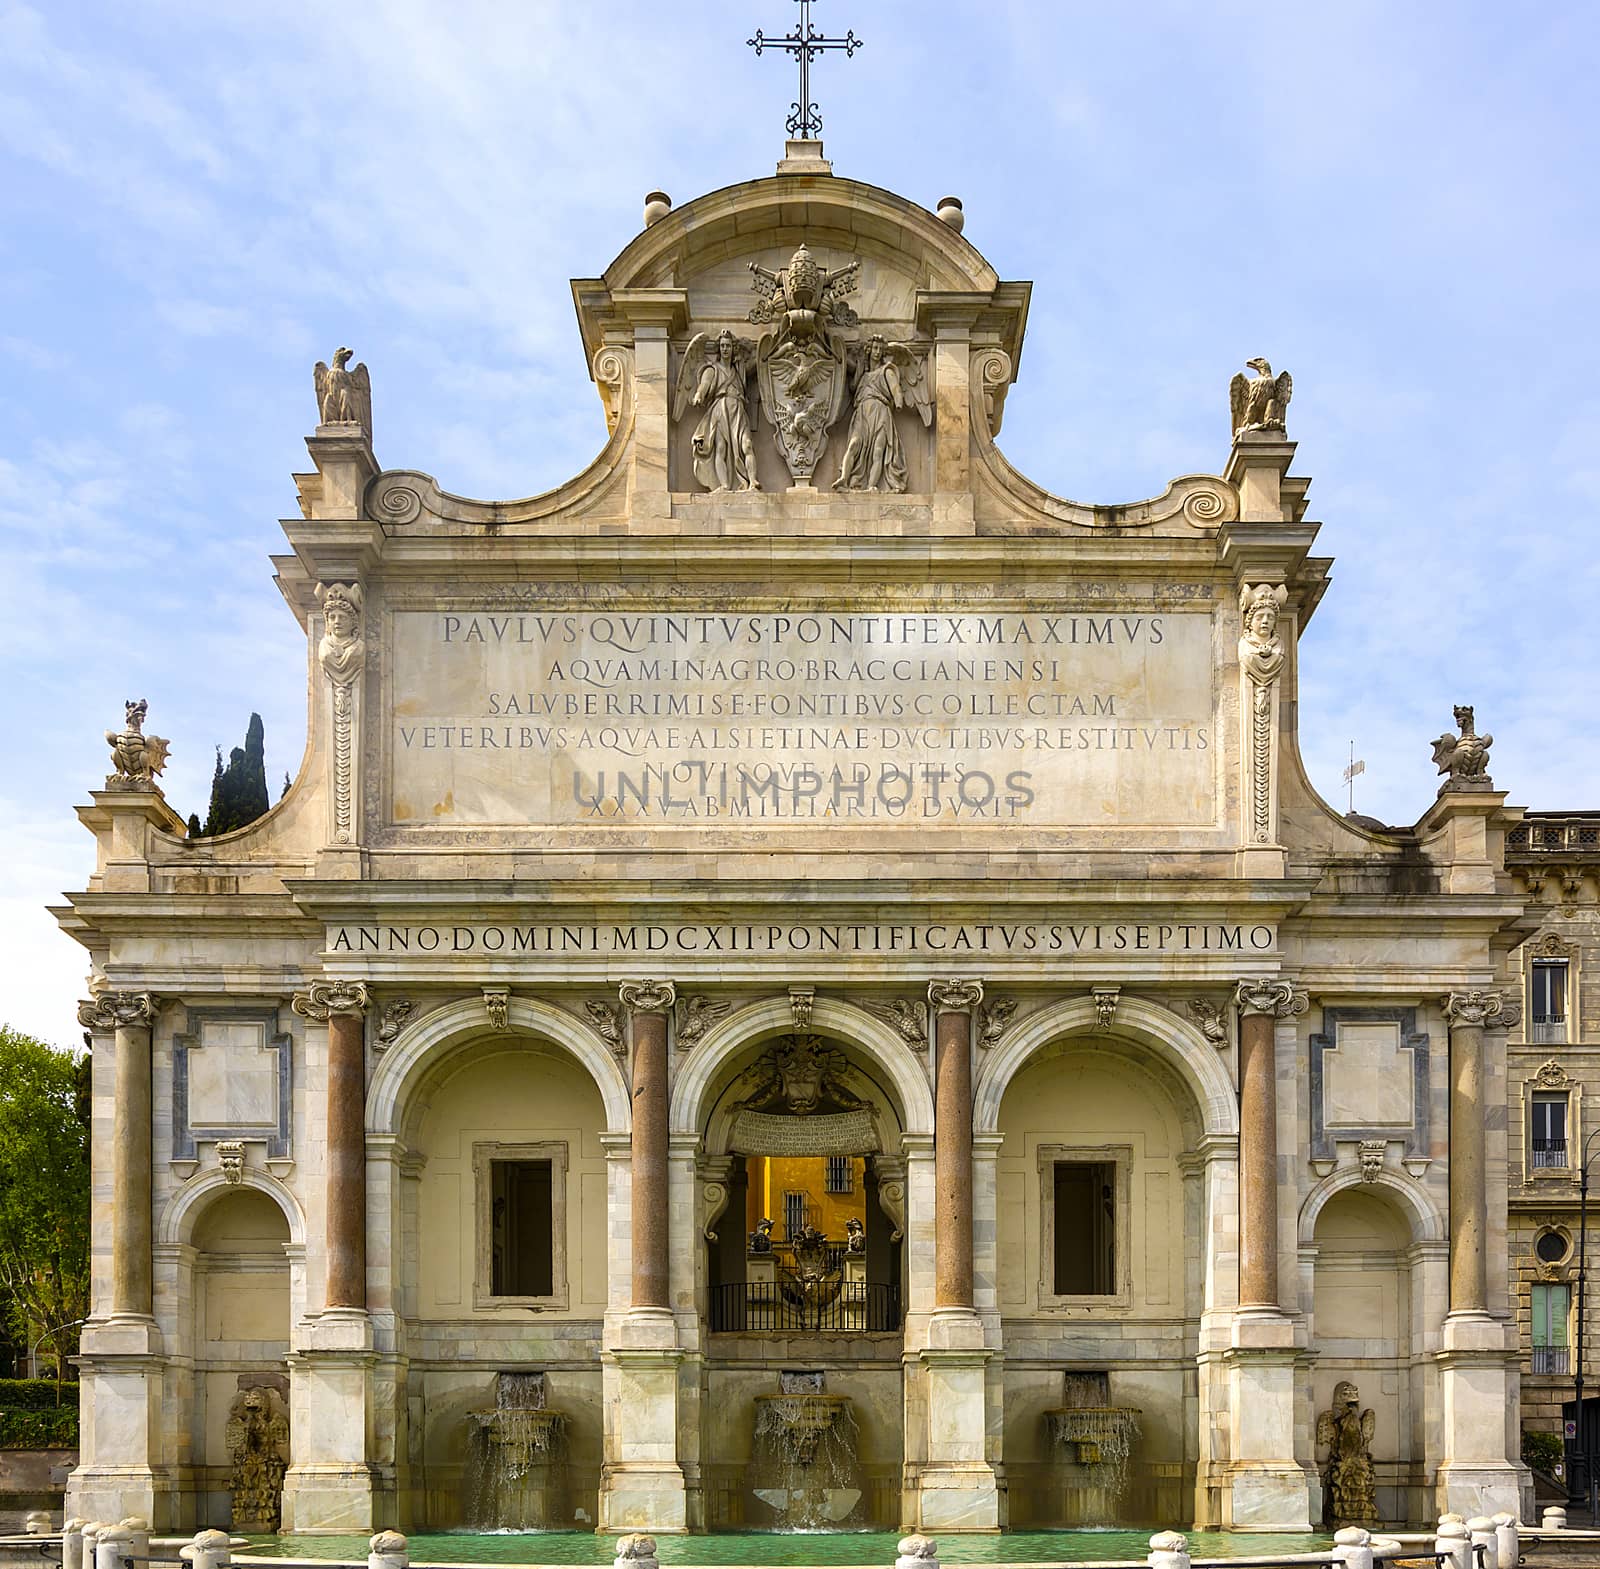 The Fontana dell'Acqua Paola is a monumental fountain located on the Janiculum Hill in Rome, Italy